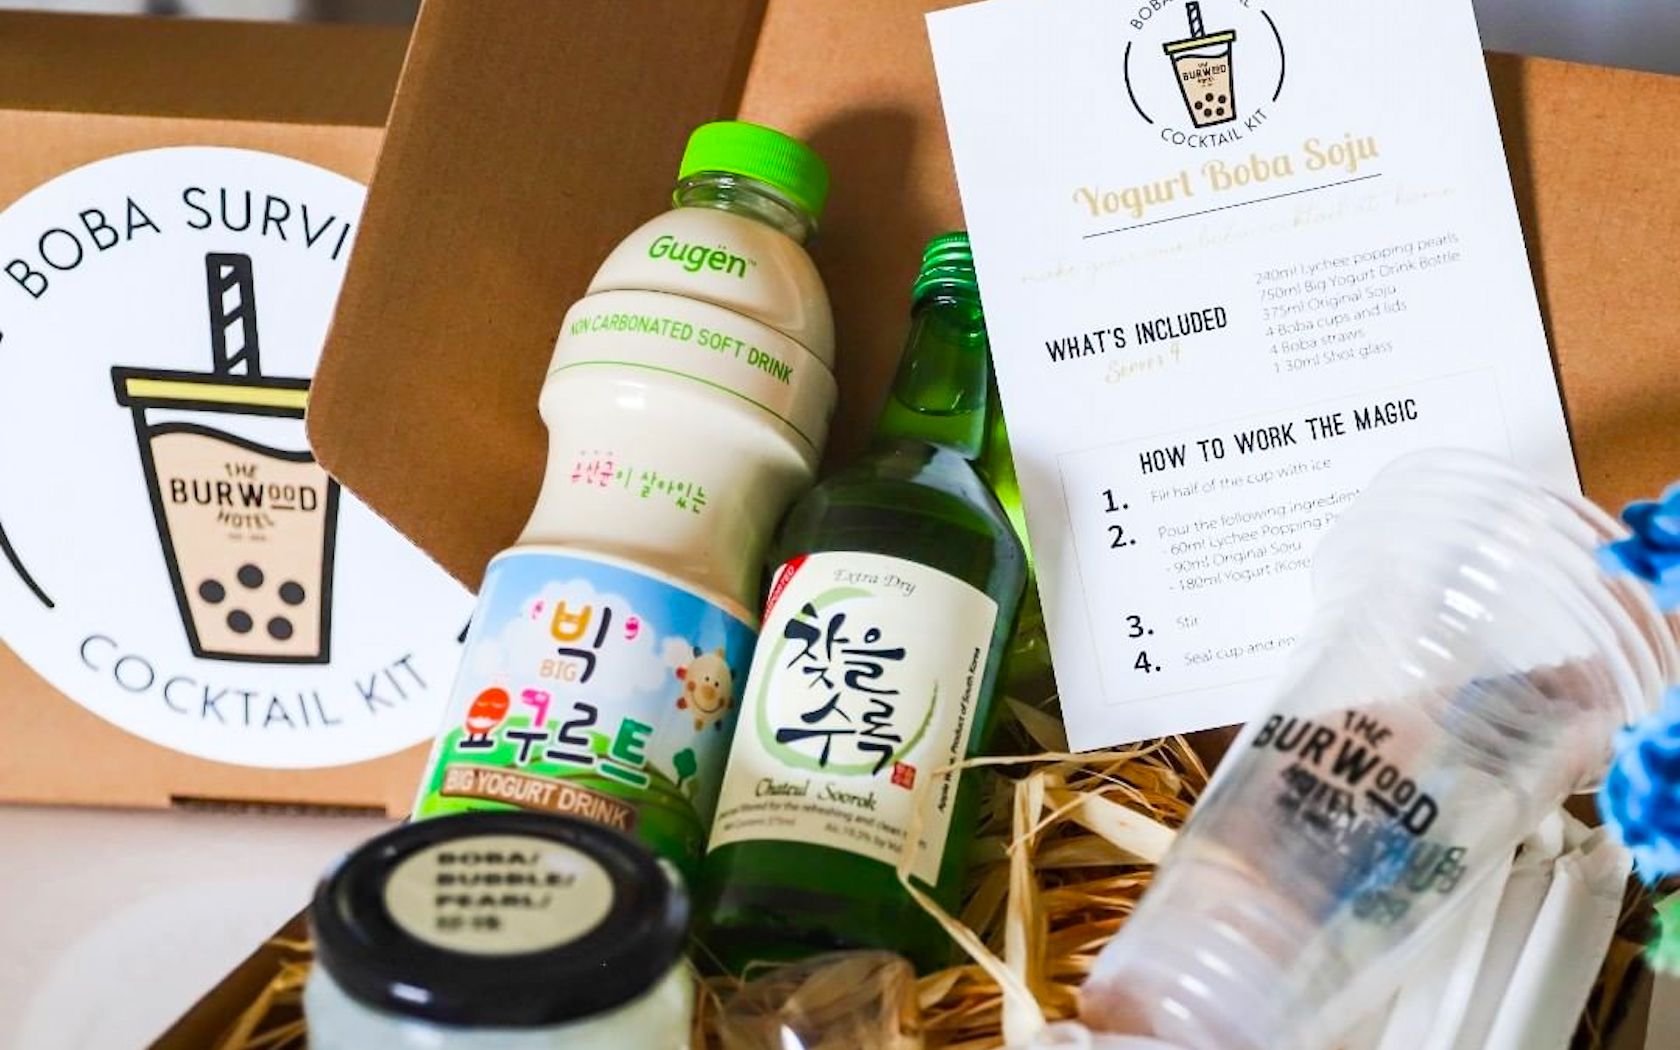 A DIY alcoholic bubble tea kit from The Burwood Hotel for people who want to learn how to make bubble tea at home.